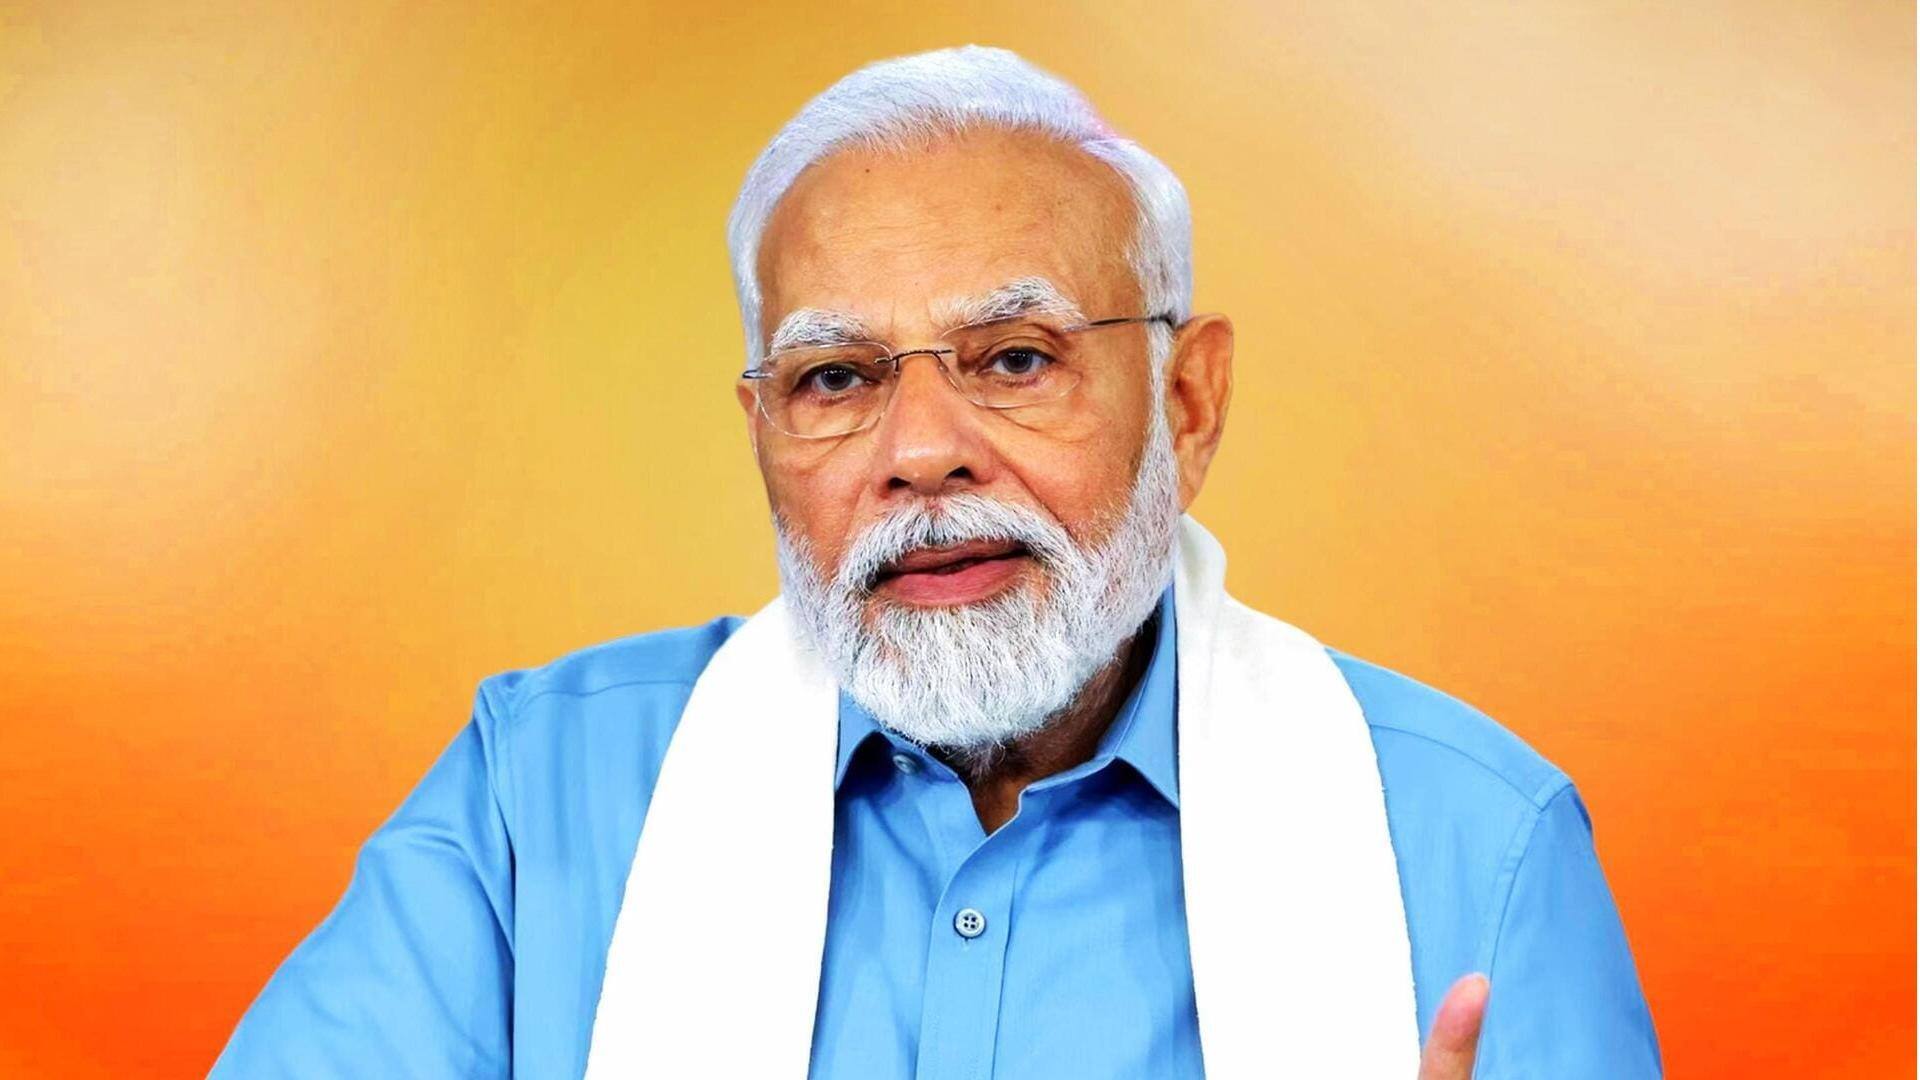 Pay Rs. 500cr or we'll assassinate Modi: NIA receives email